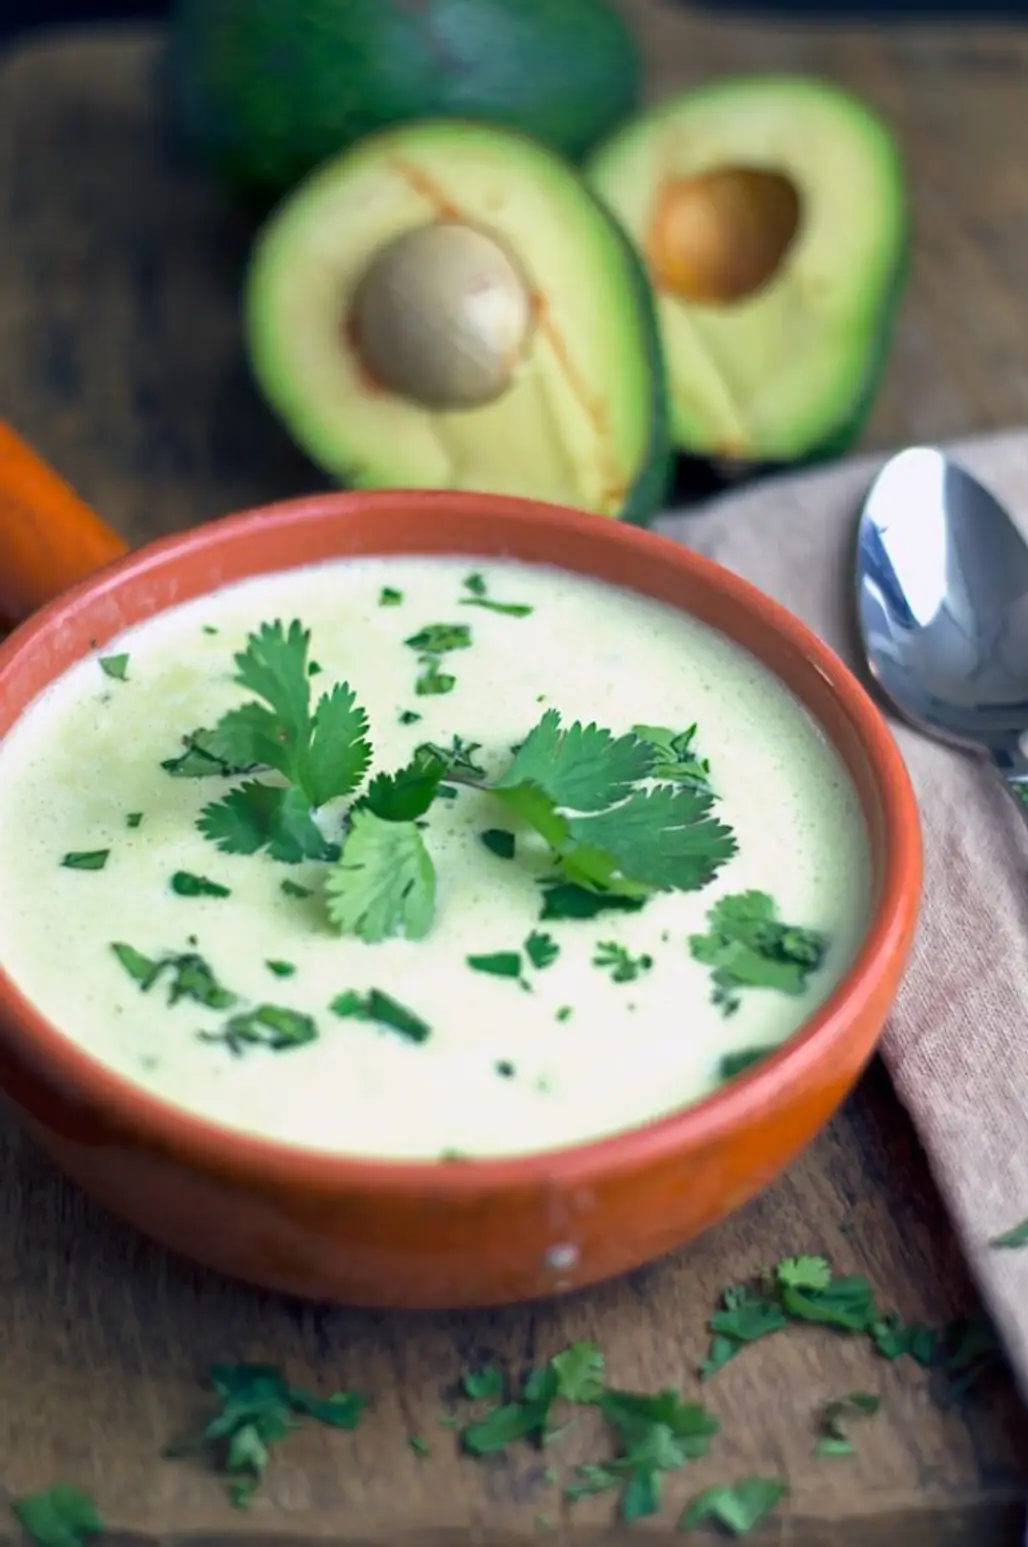 Cream Based Soups Contain More Saturated Fat than Broth Based Soup